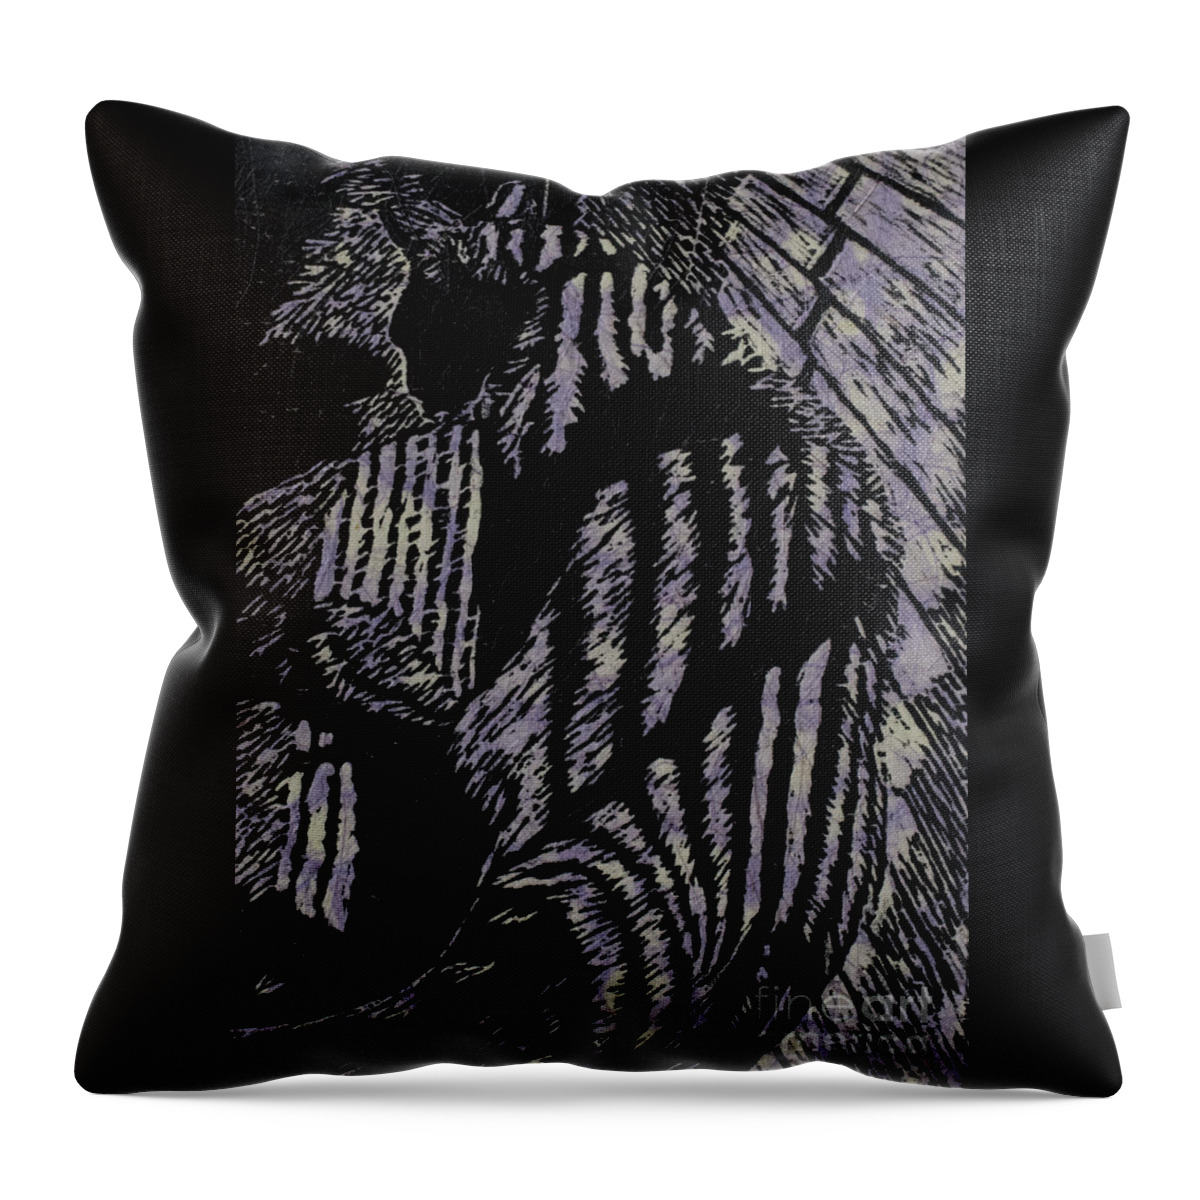 Woodcut Throw Pillow featuring the mixed media Poppy by Jackie MacNair